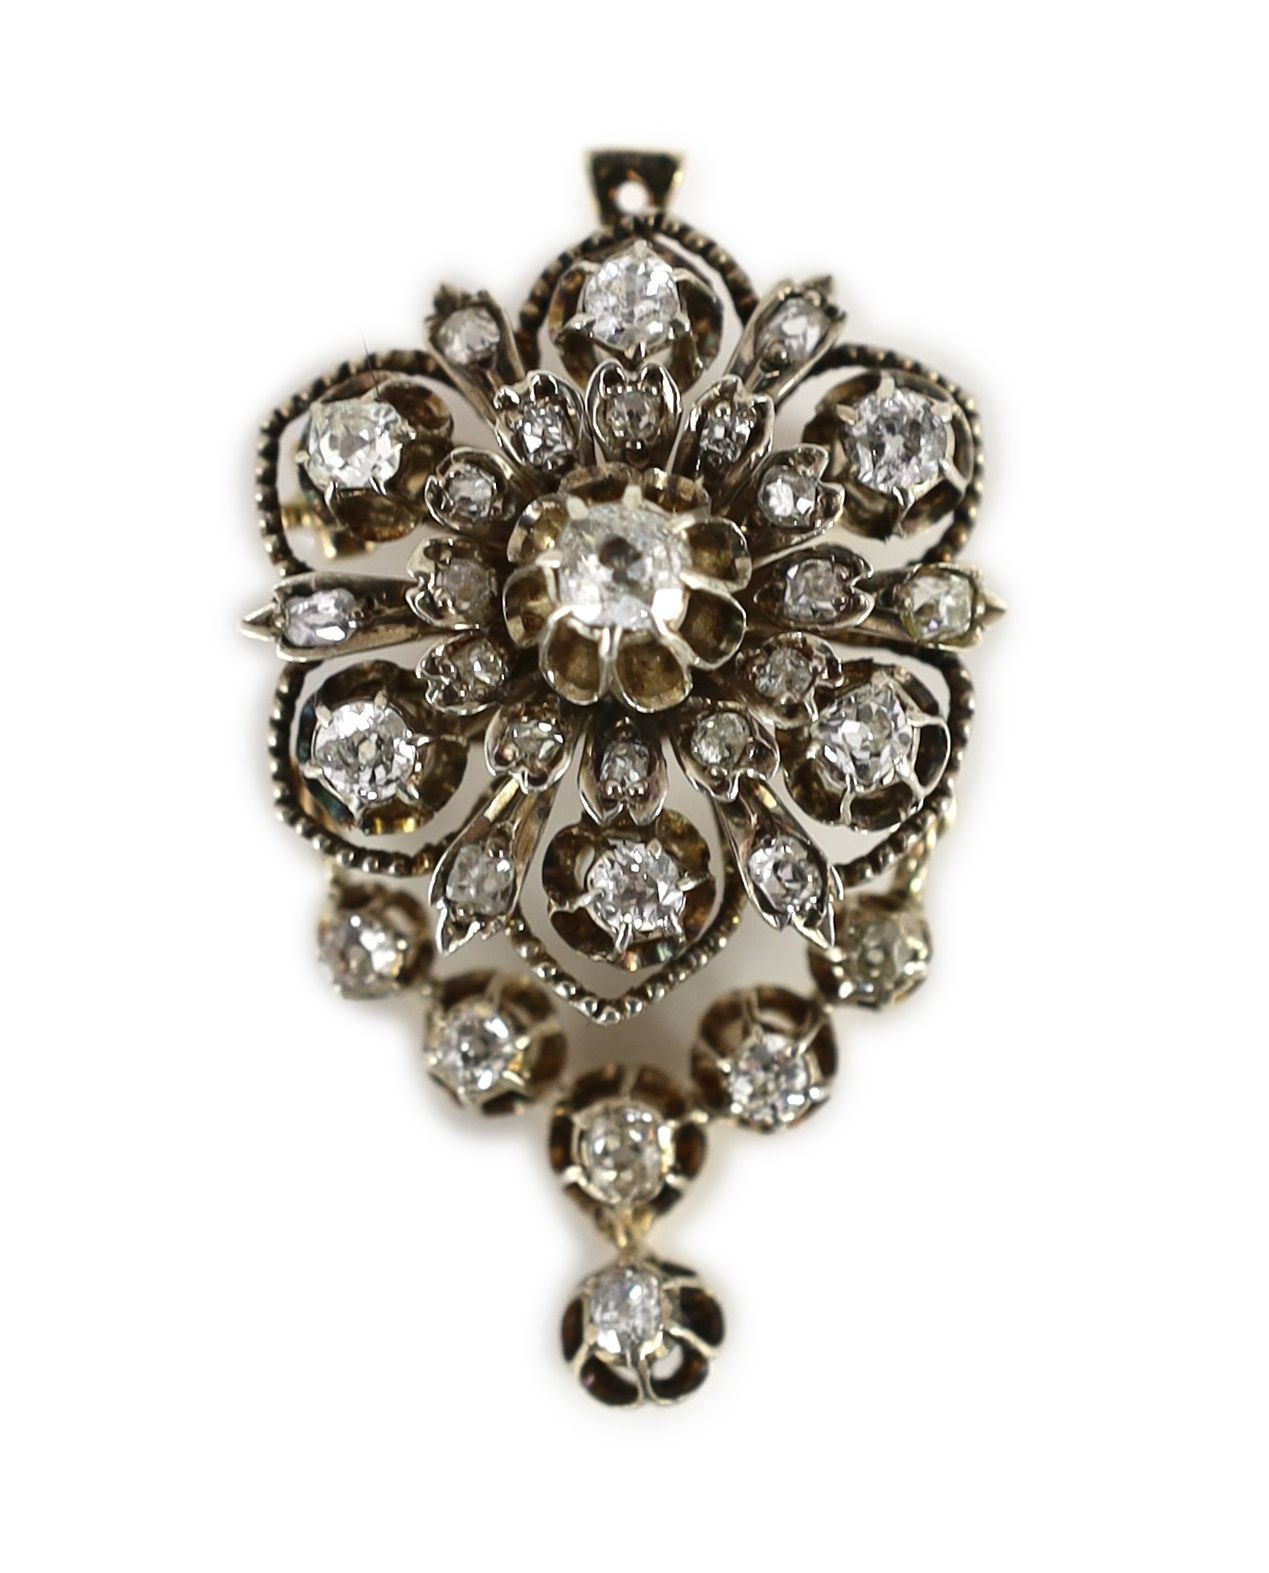 A 19th century gold, silver and diamond cluster drop pendant brooch